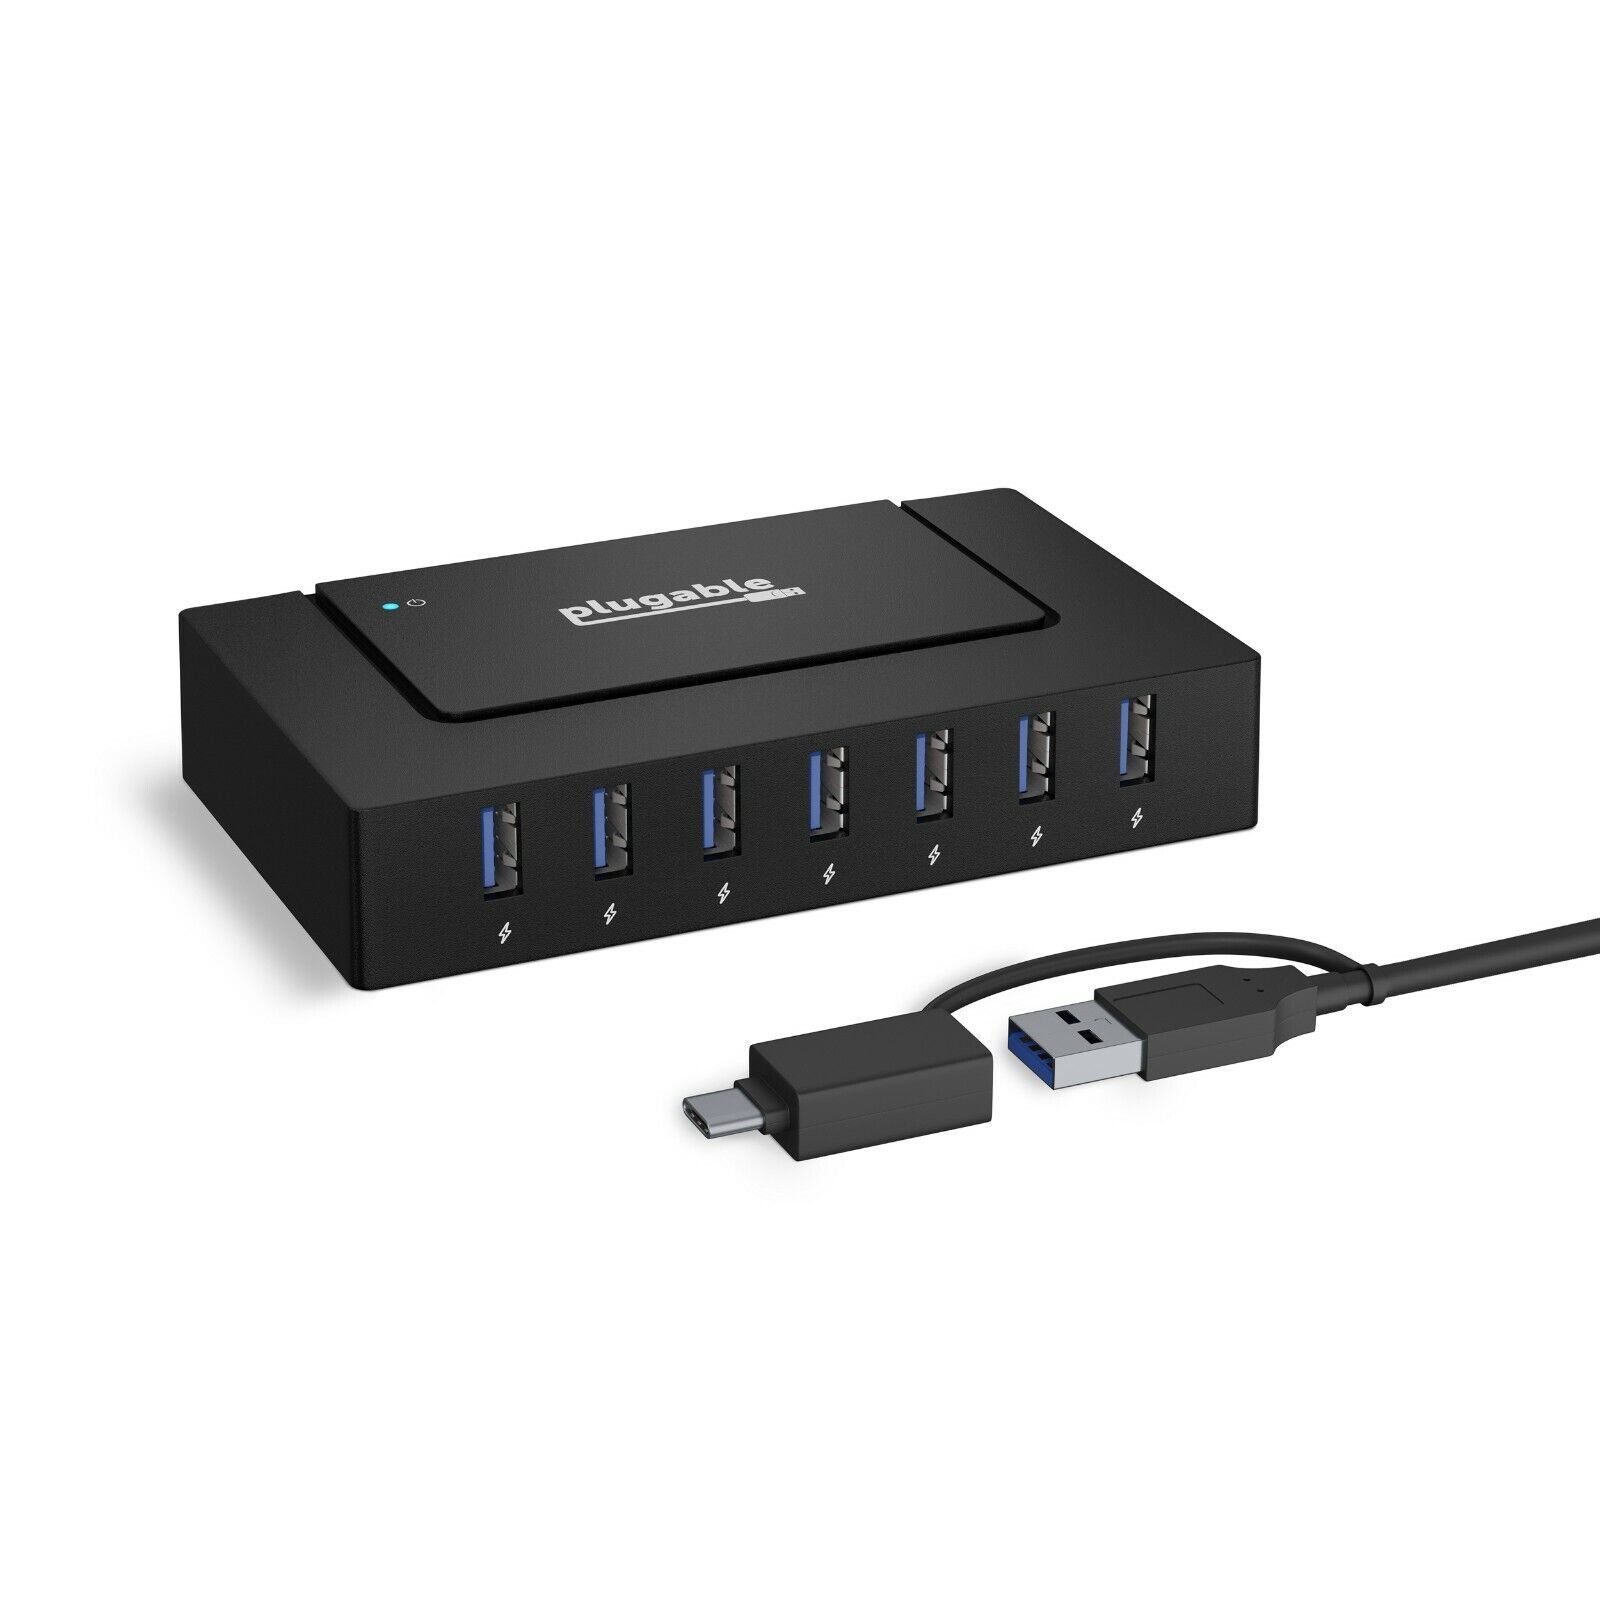 Plugable 7-in-1 USB Charging Hub for Laptops with USB-C or USB 3.0